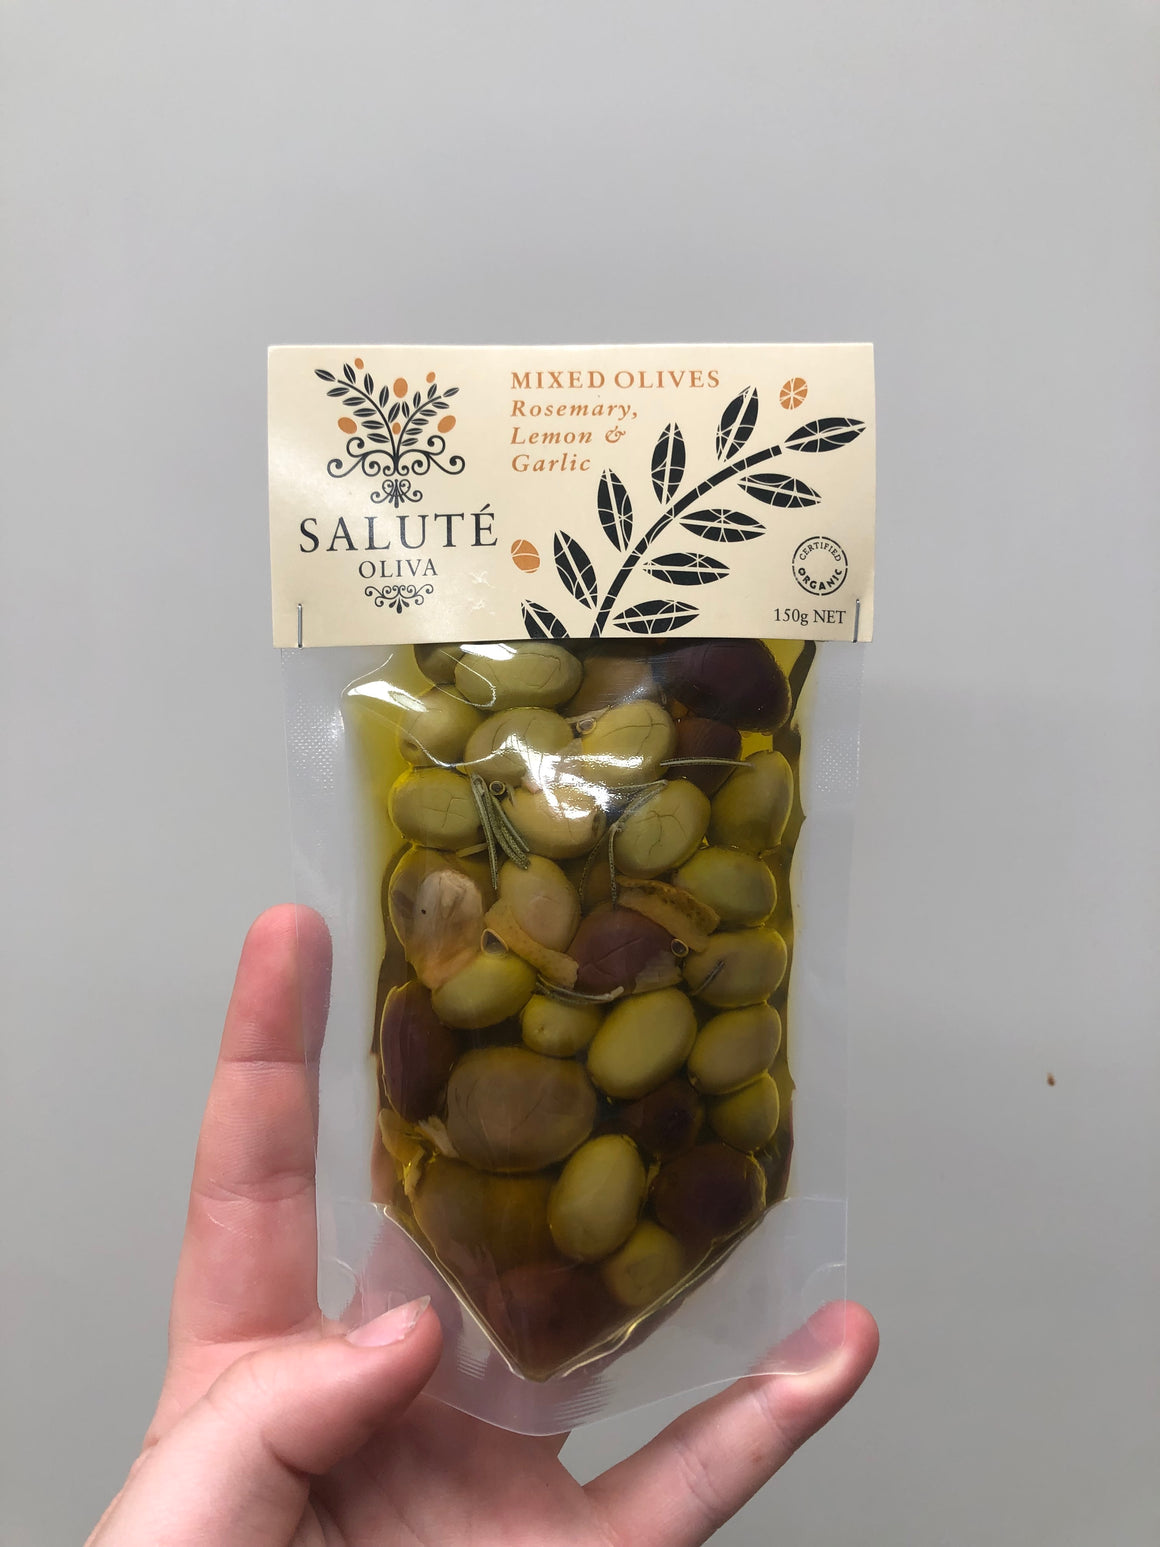 Salute 150g Mixed Olives with Rosemary Lemon and Garlic in vacuum pouches